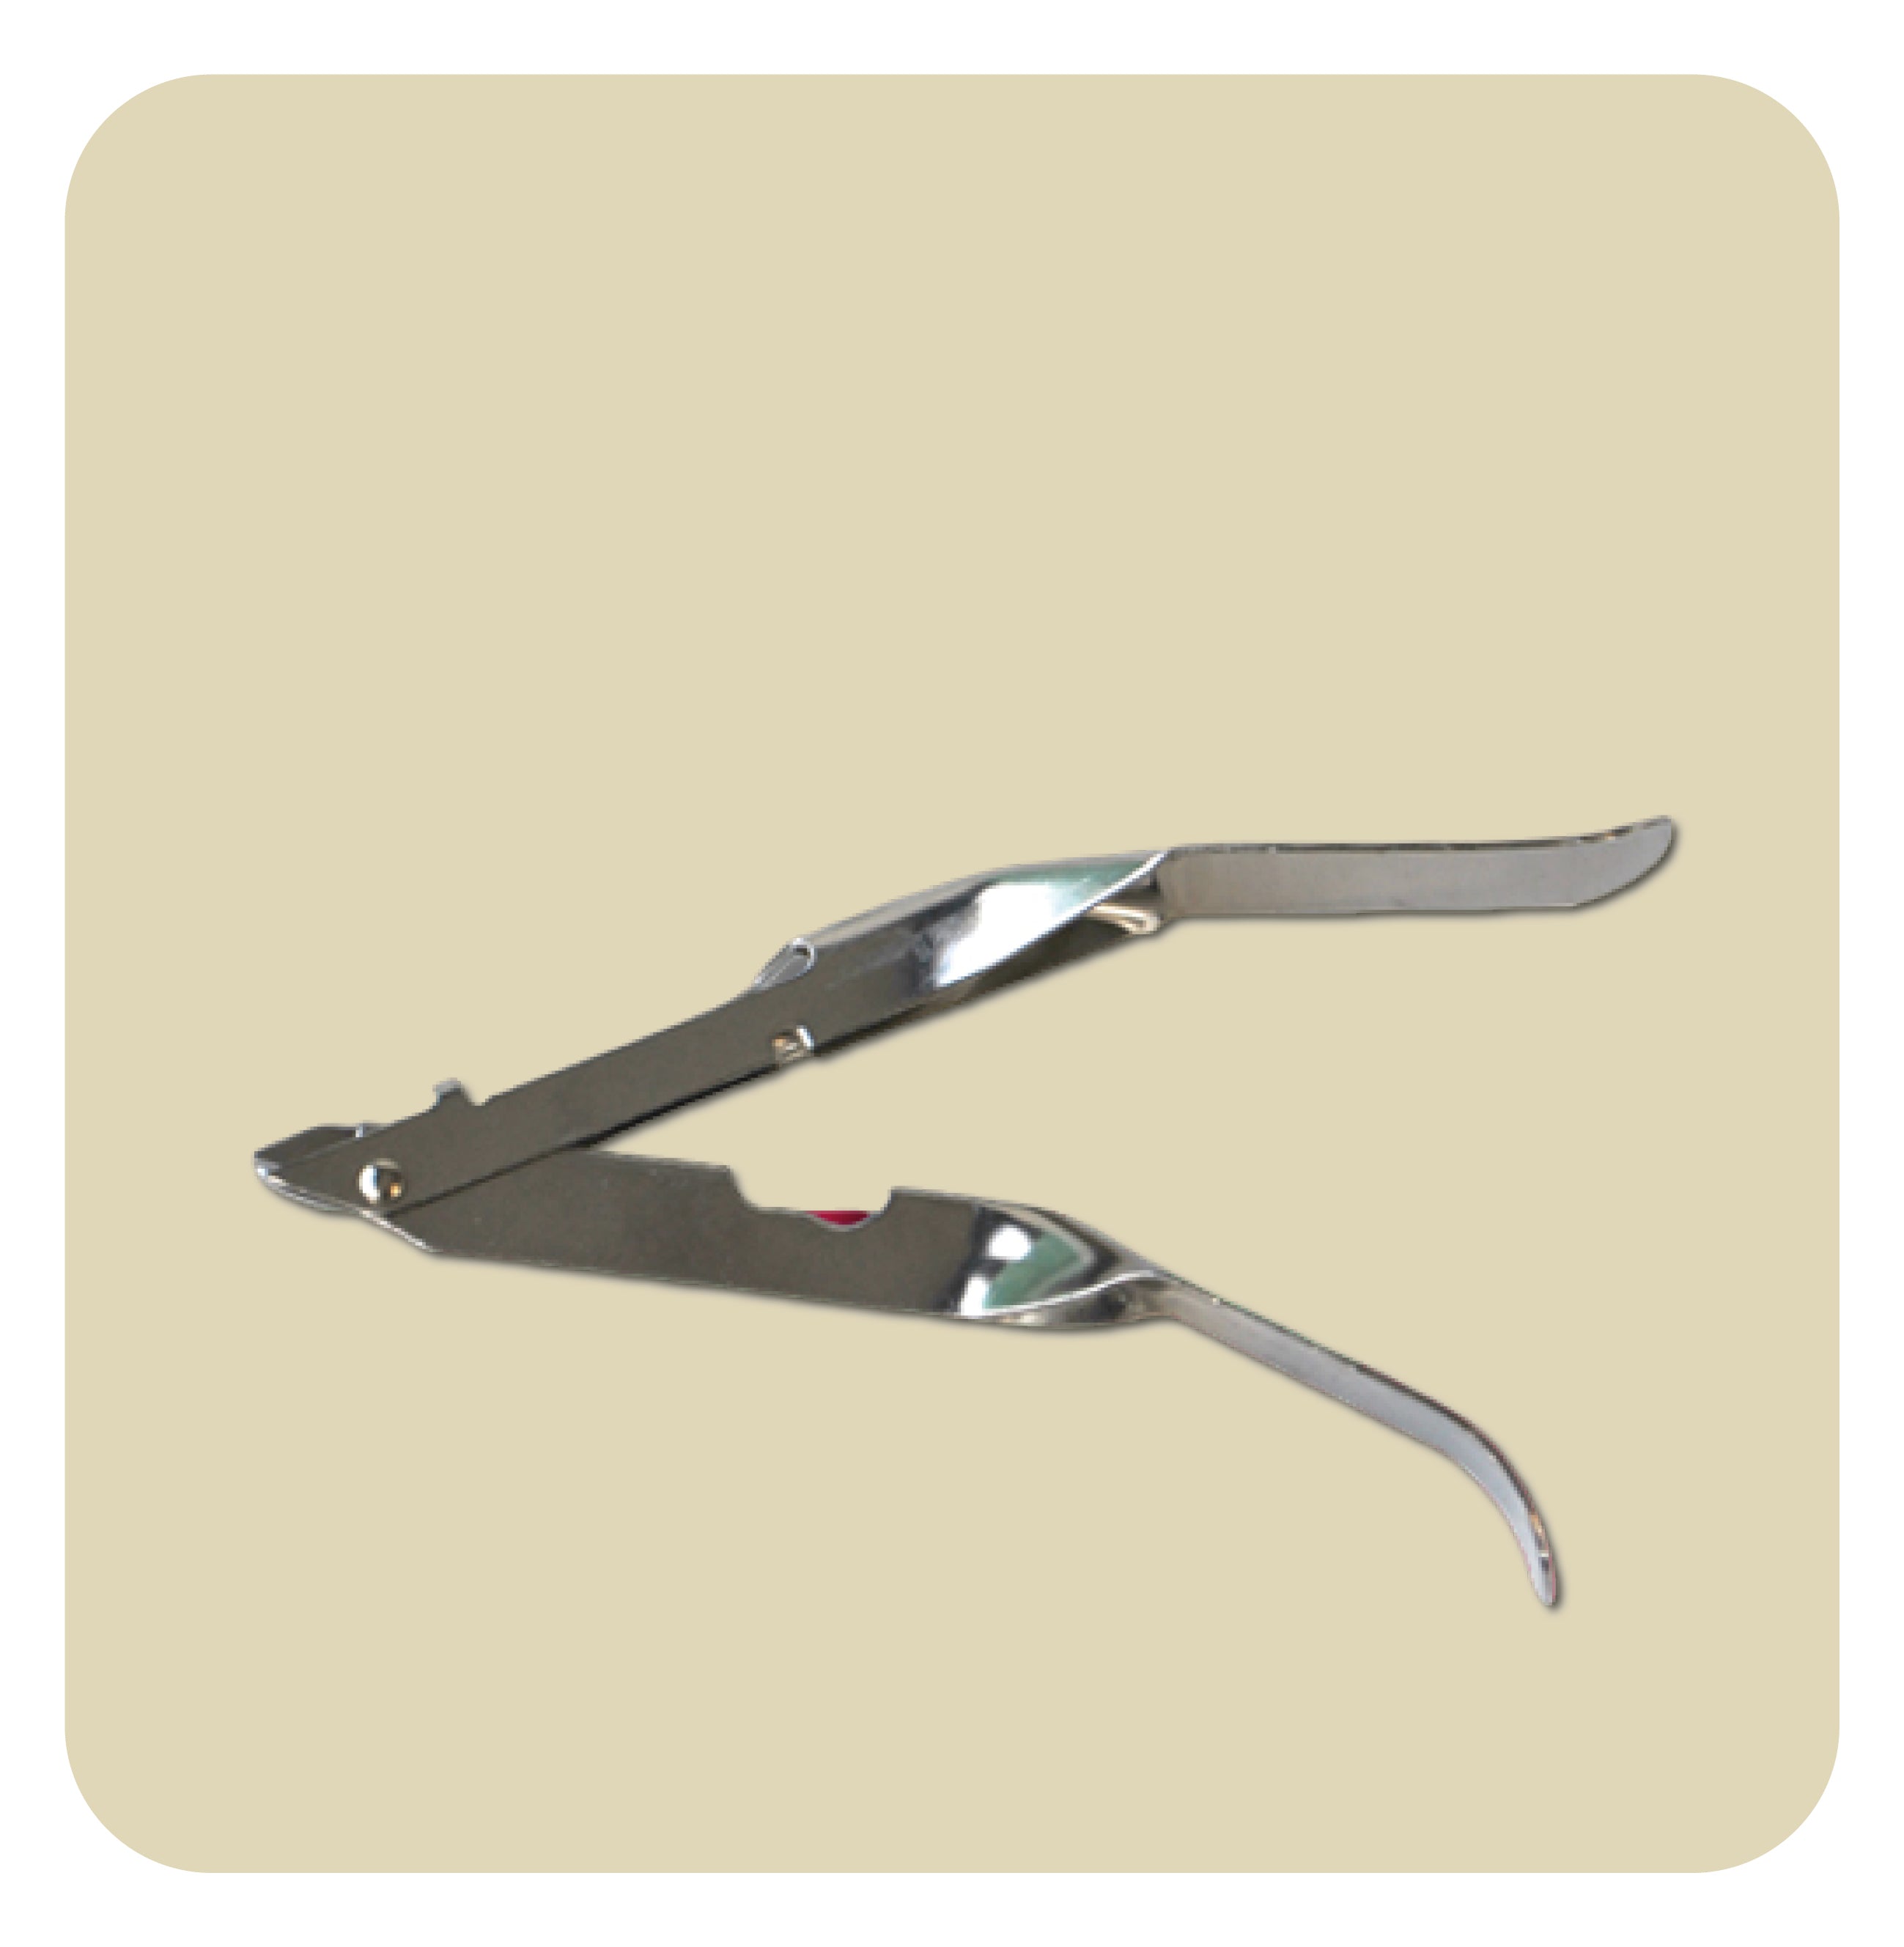 Sterile staple remover with metal jaws